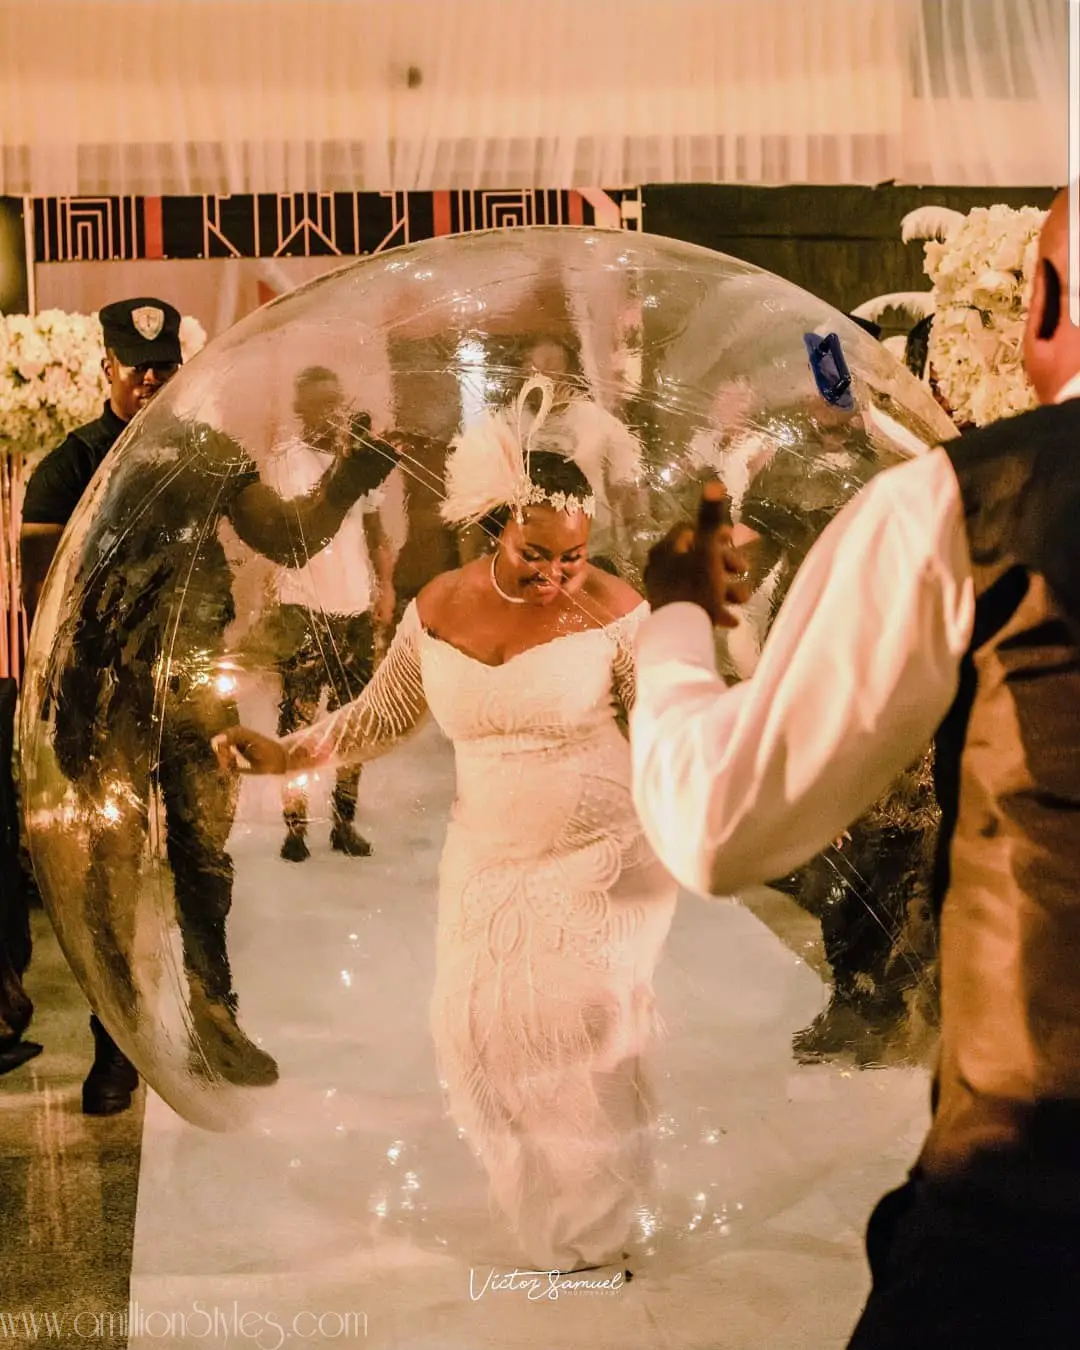 See This Bride-In-A-Bubble Grand Entrance At Wedding Reception!